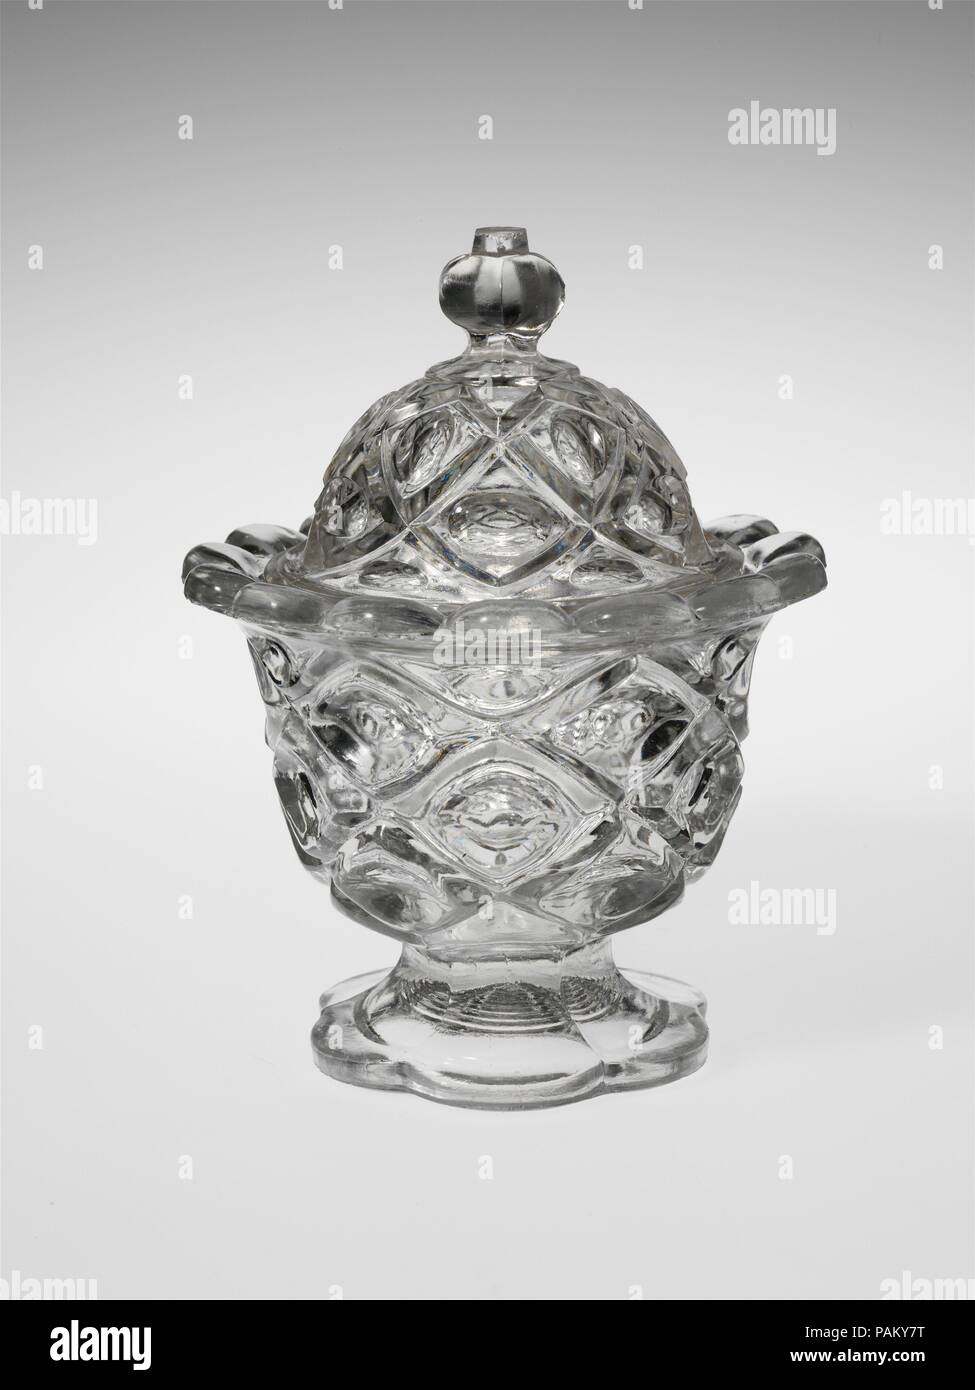 Sugar Bowl. Culture: American. Dimensions: H. 7 in. (17.8 cm); Diam. 5 3/8 in. (13.7 cm). Date: 1850-70.  With the development of new formulas and techniques, glass-pressing technology had improved markedly by the late 1840s. By this time, pressed tablewares were being produced in large matching sets and innumerable forms. During the mid-1850s, colorless glass and simple geometric patterns dominated. Catering to the demand for moderately-priced dining wares, the glass industry in the United States expanded widely, and numerous factories supplied less expensive pressed glassware to the growing  Stock Photo